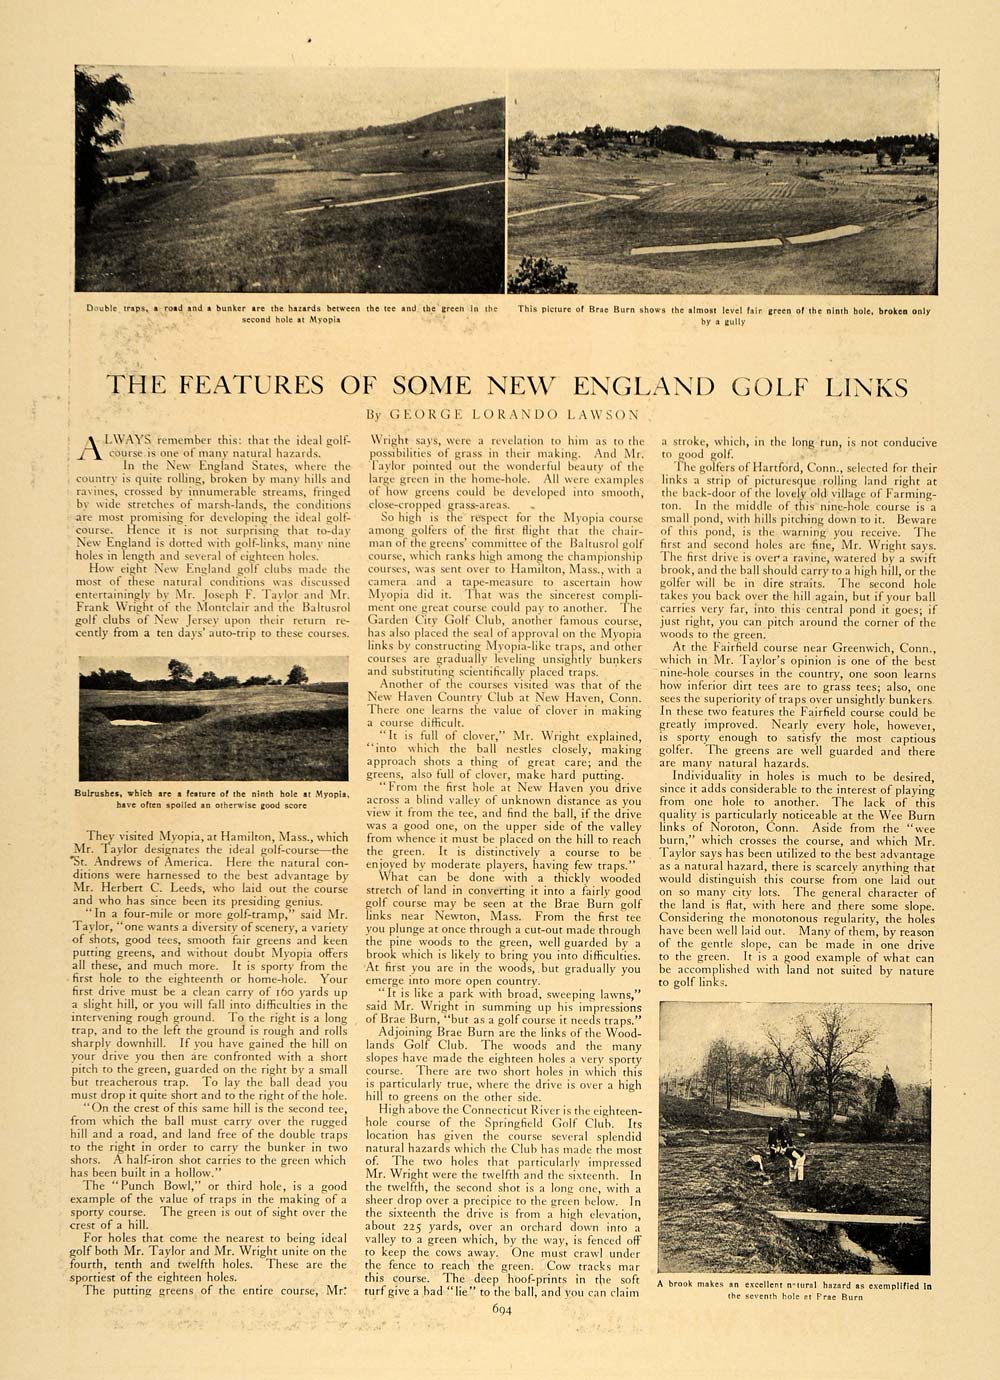 1907 Article New England Golf Link Features G.L. Lawson - ORIGINAL CL9